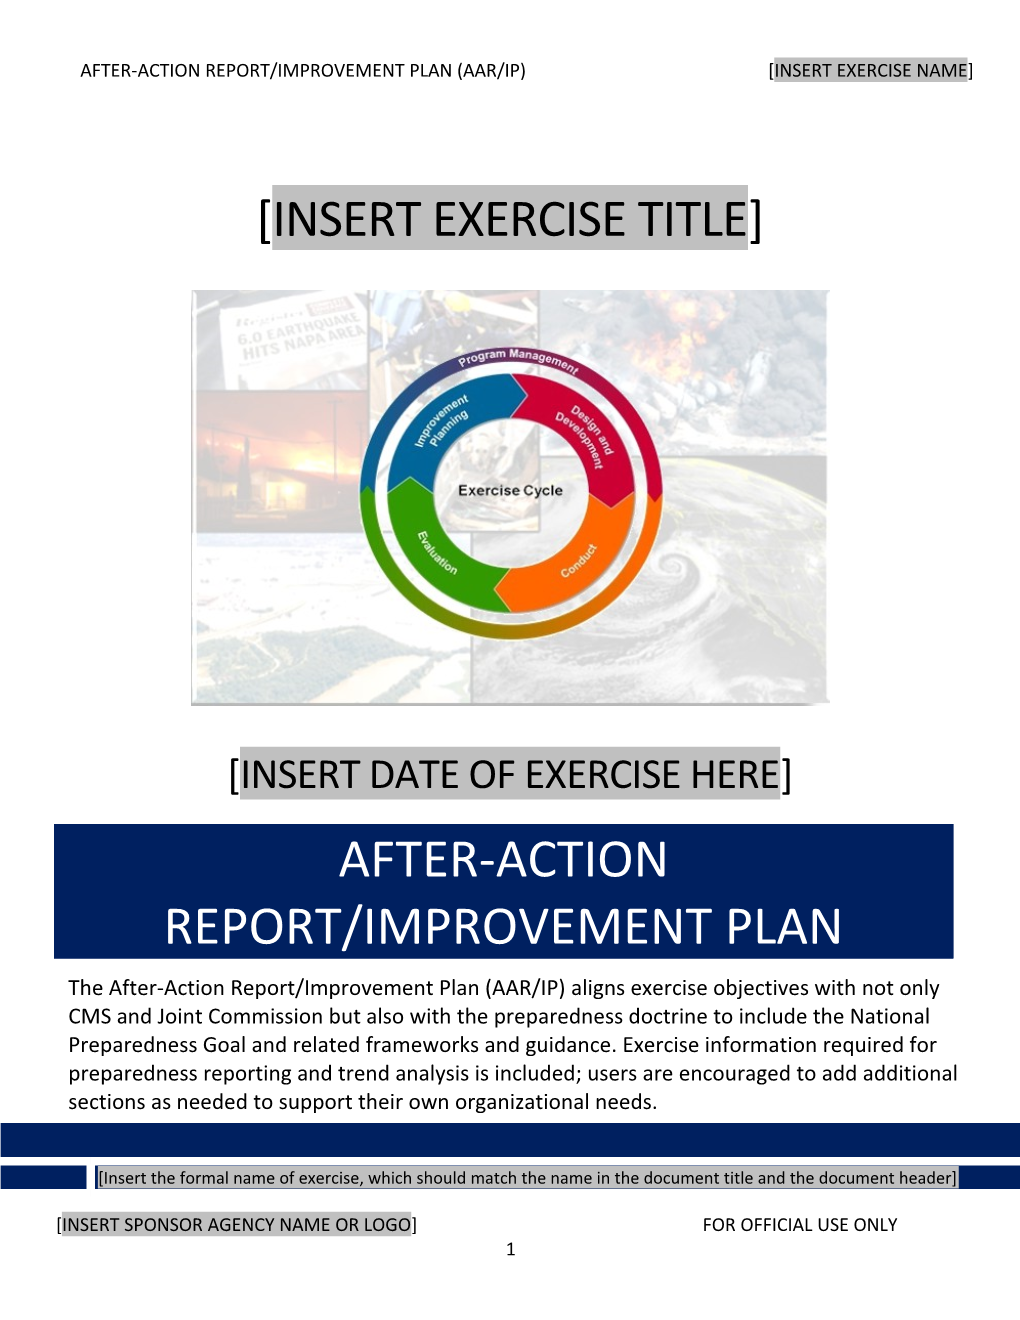 After-Action Report/Improvement Plan (AAR/IP) INSERT EXERCISE NAME